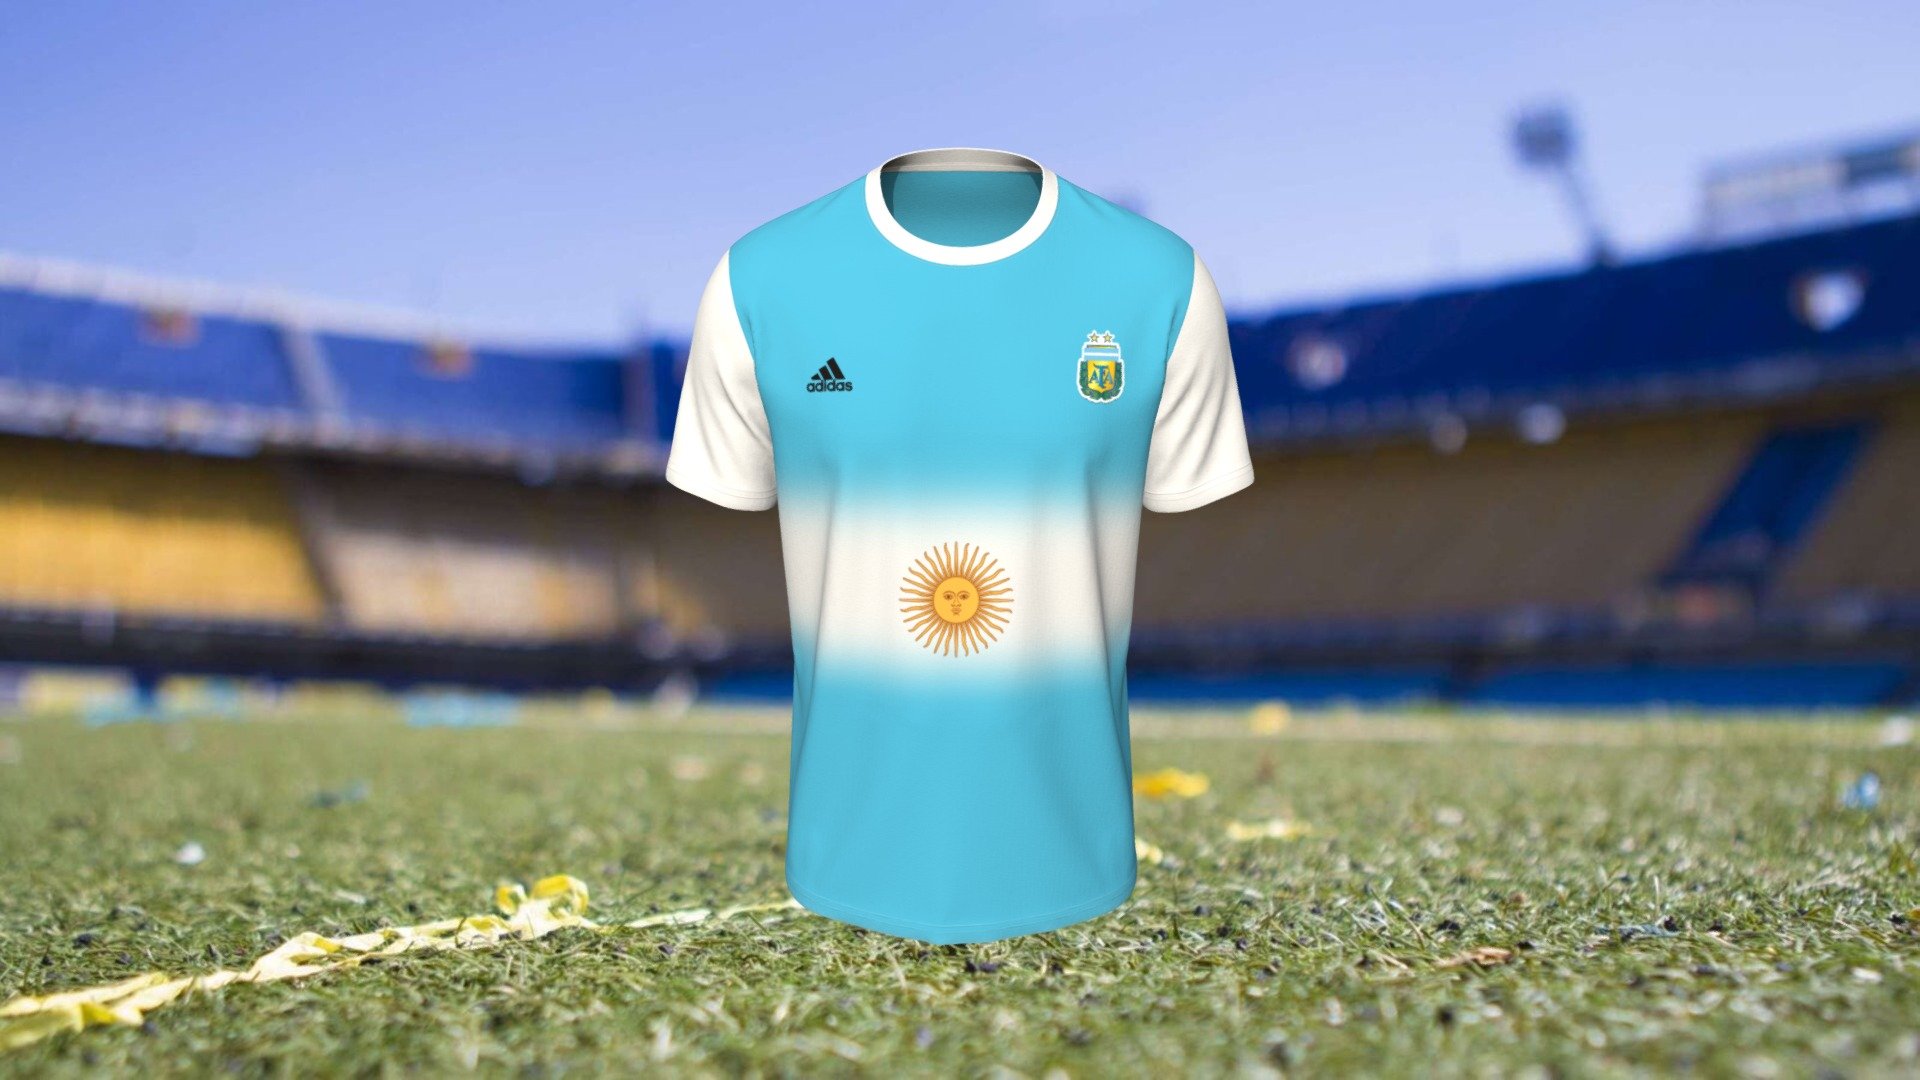 Cloth Title = Men's Replica Argentina Jersey

SKU = DG100044 

Category = Unisex 

Product Type = T-Shirt 

Cloth Length = Regular 

Body Fit = Loose Fit 

Occasion = Casual  

Sleeve Style = Set In Sleeve


Our Services:

3D Apparel Design.

OBJ,FBX,GLTF Making with High/Low Poly.

Fabric Digitalization.

Mockup making.

3D Teck Pack.

Pattern Making.

2D Illustration.

Cloth Animation and 360 Spin Video.


Contact us:- 

Email: info@digitalfashionwear.com 

Website: https://digitalfashionwear.com 


We designed all the types of cloth specially focused on product visualization, e-commerce, fitting, and production. 

We will design: 

T-shirts 

Polo shirts 

Hoodies 

Sweatshirt 

Jackets 

Shirts 

TankTops 

Trousers 

Bras 

Underwear 

Blazer 

Aprons 

Leggings 

and All Fashion items. 





Our goal is to make sure what we provide you, meets your demand 3d model